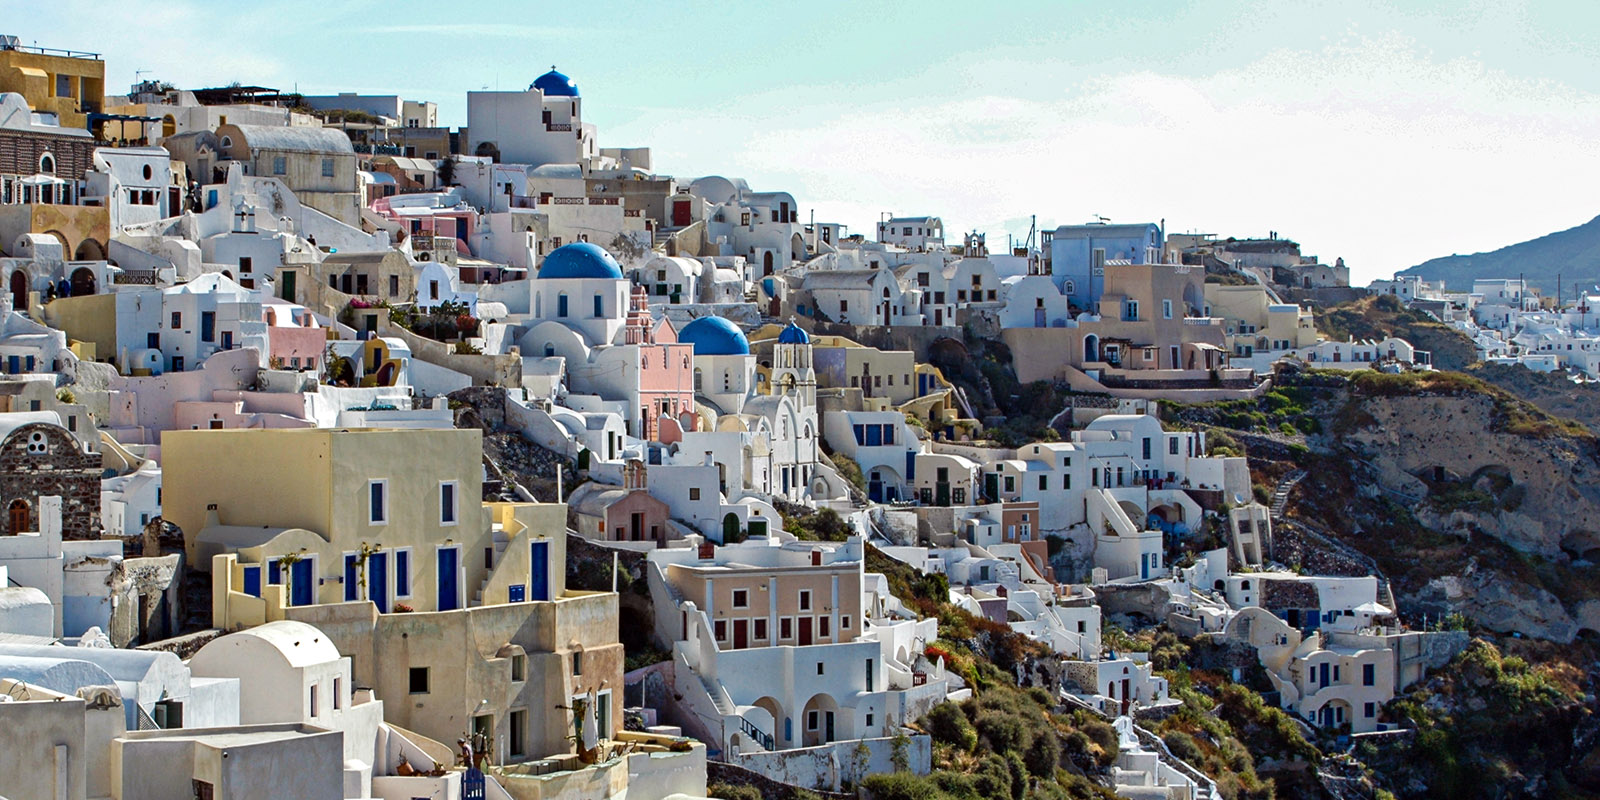 The amazing village of Oia is perched on the cliffs of Santorini's volcanic caldera